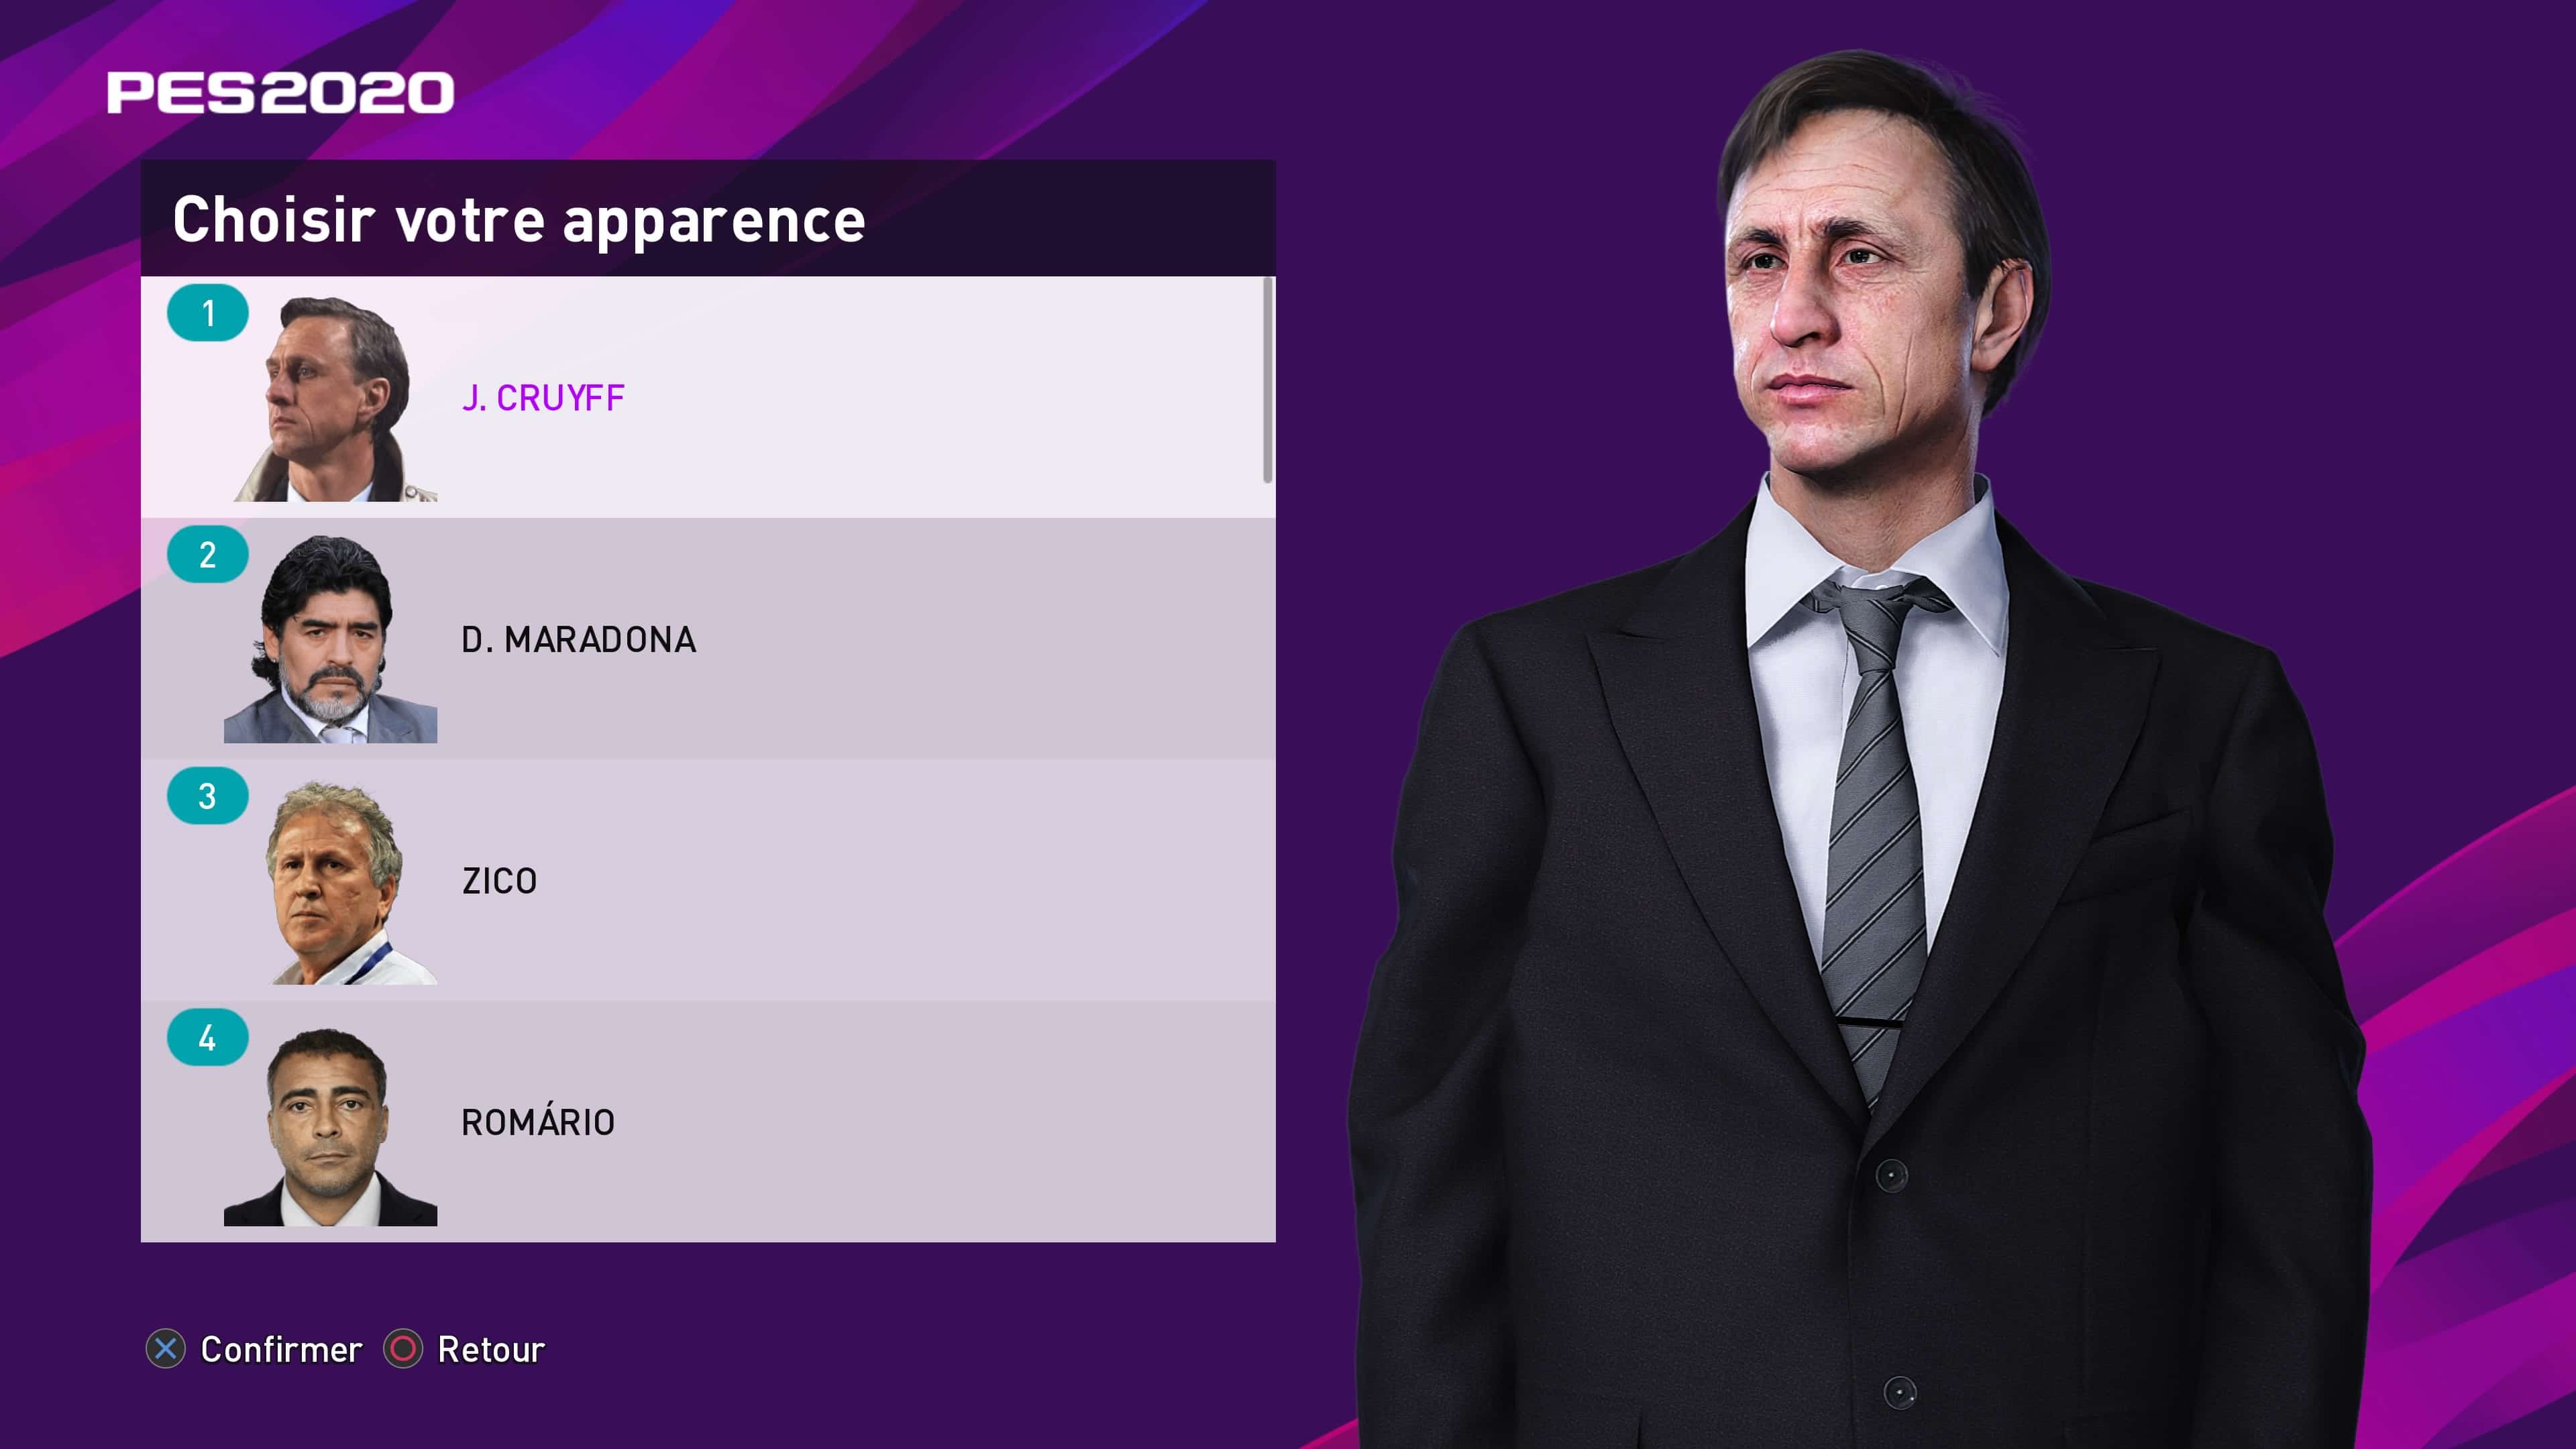 PES 2020 personnage